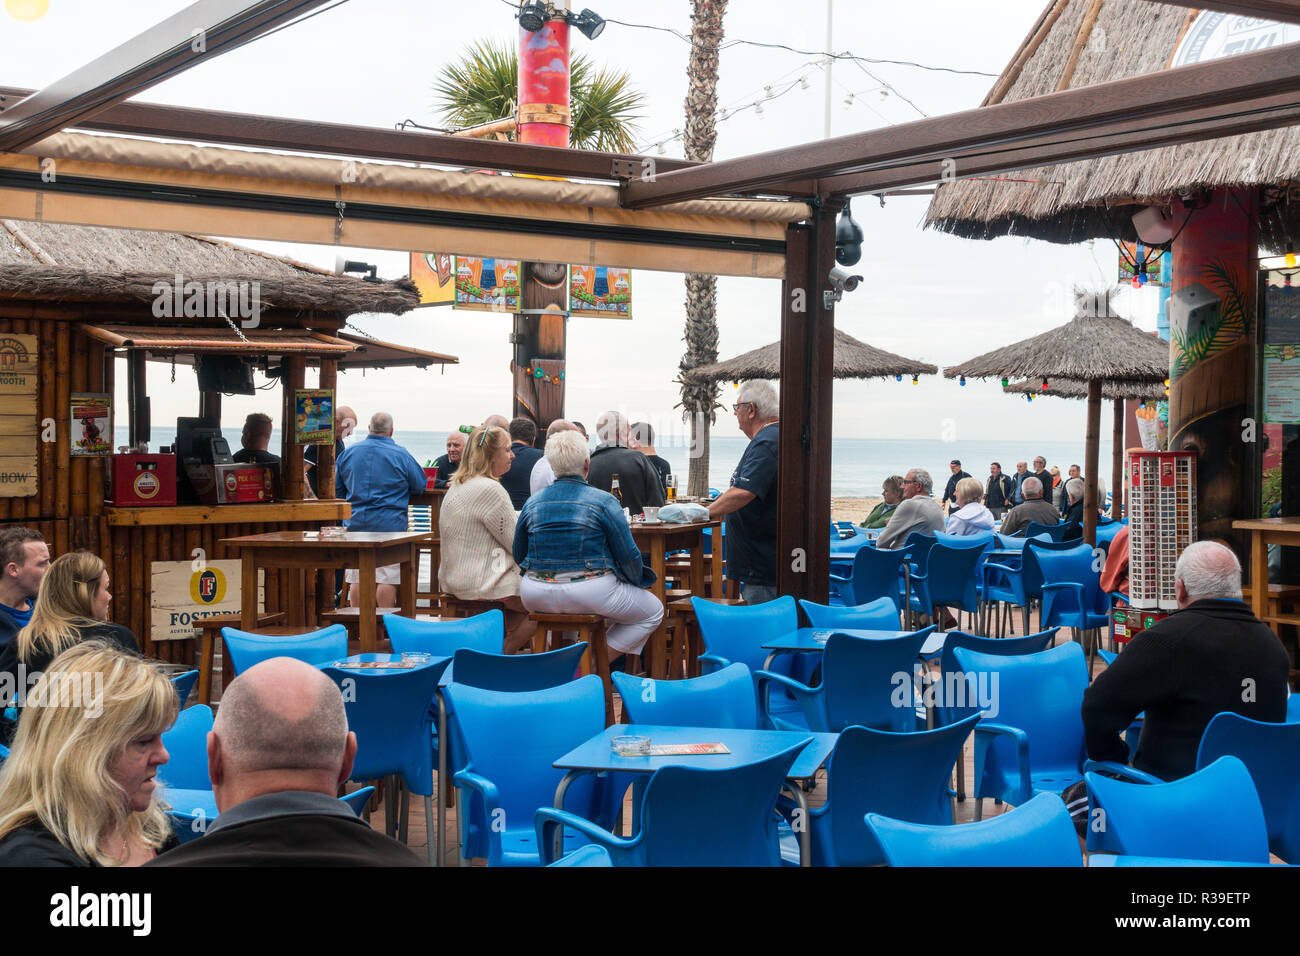 Benidorm, Costa Blanca, Spain, 22nd November 2018. Despite reports in the British press that complaints of anti-social behaviour have forced the closure of this popular tourist bar on Levante Beach, the Tiki Bar is pictured here today, trading as usual. Credit: Mick Flynn/Alamy Live News Stock Photo